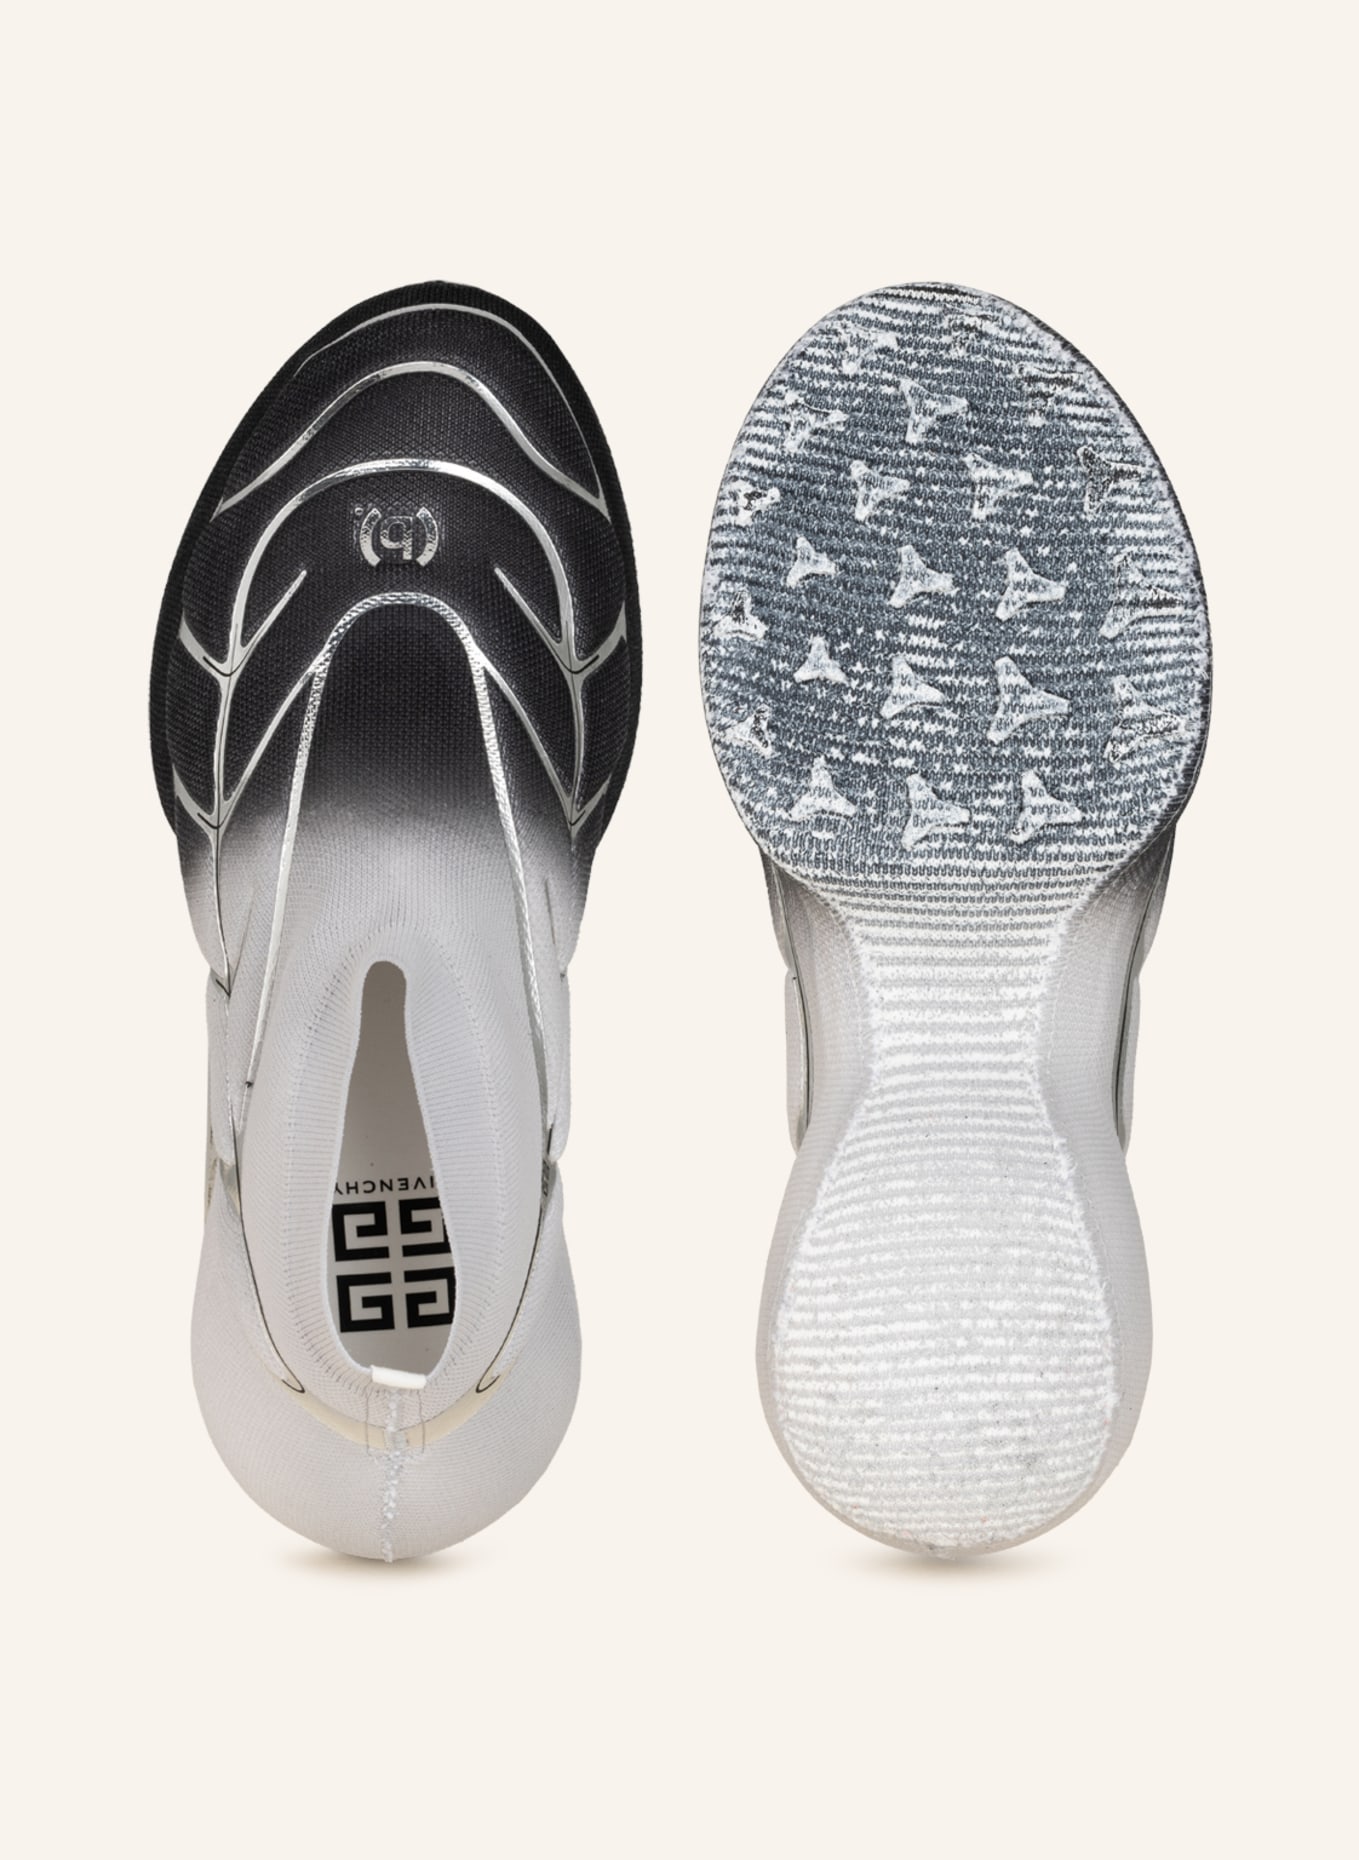 GIVENCHY Sneakers TK-360 PLUS, Color: SILVER/ LIGHT GRAY/ DARK GRAY (Image 5)